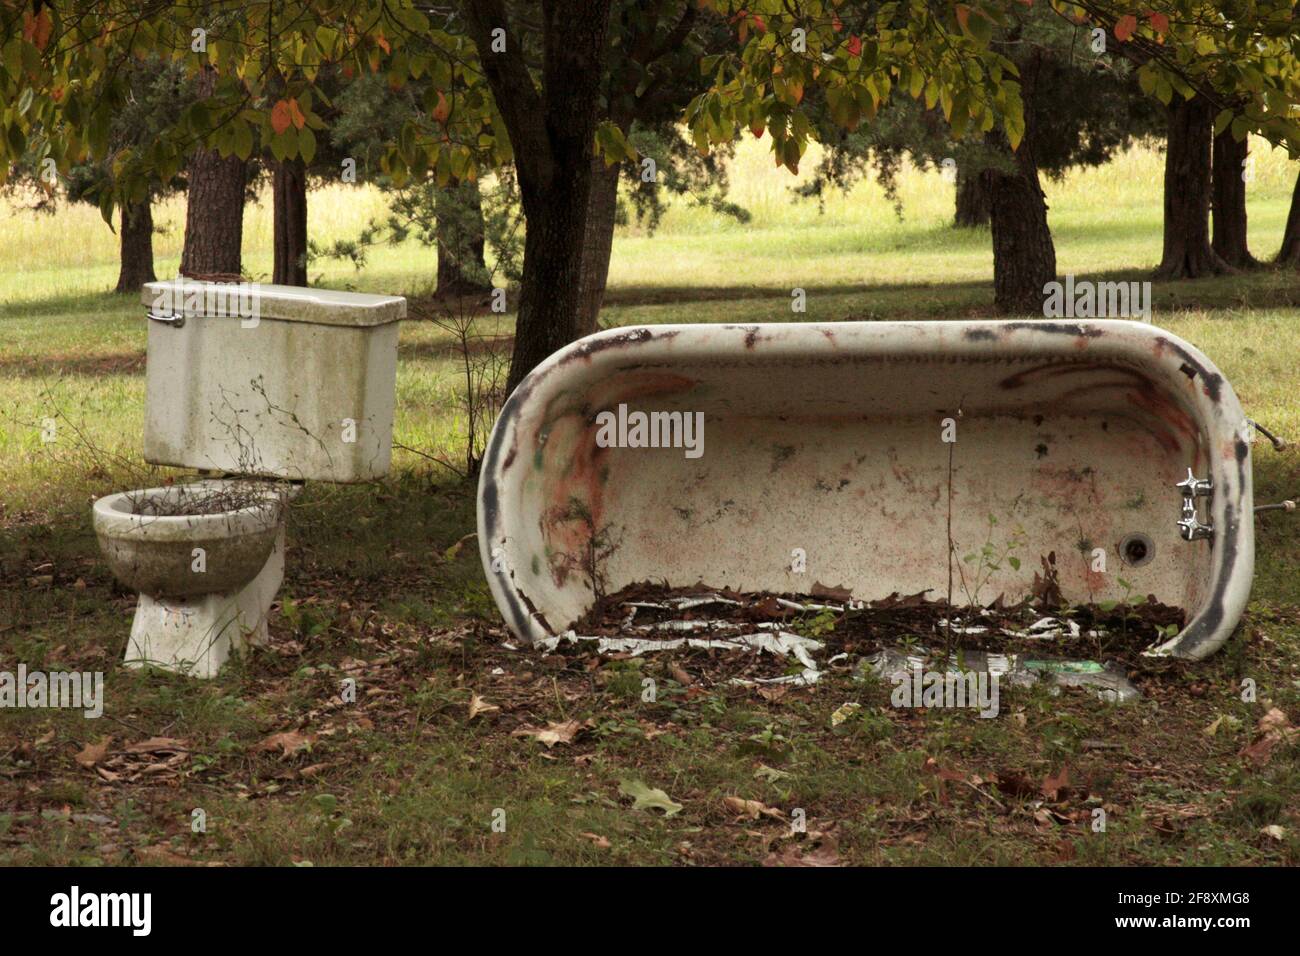 Old bathtub and toilet seat used as yard decor in rural Virginia, USA Stock Photo